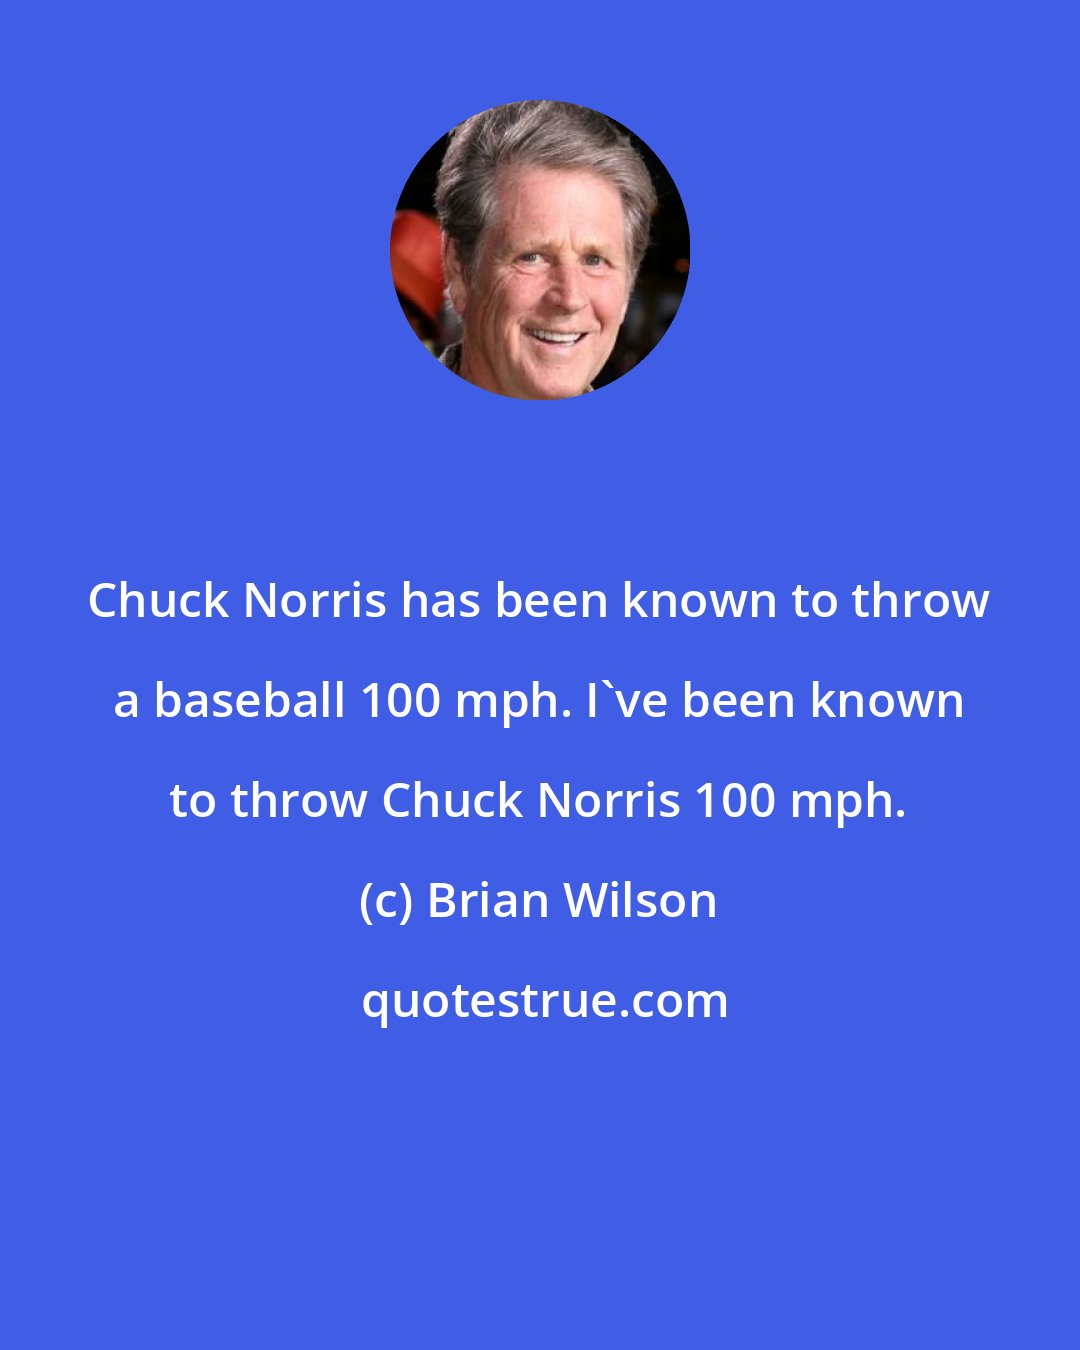 Brian Wilson: Chuck Norris has been known to throw a baseball 100 mph. I've been known to throw Chuck Norris 100 mph.